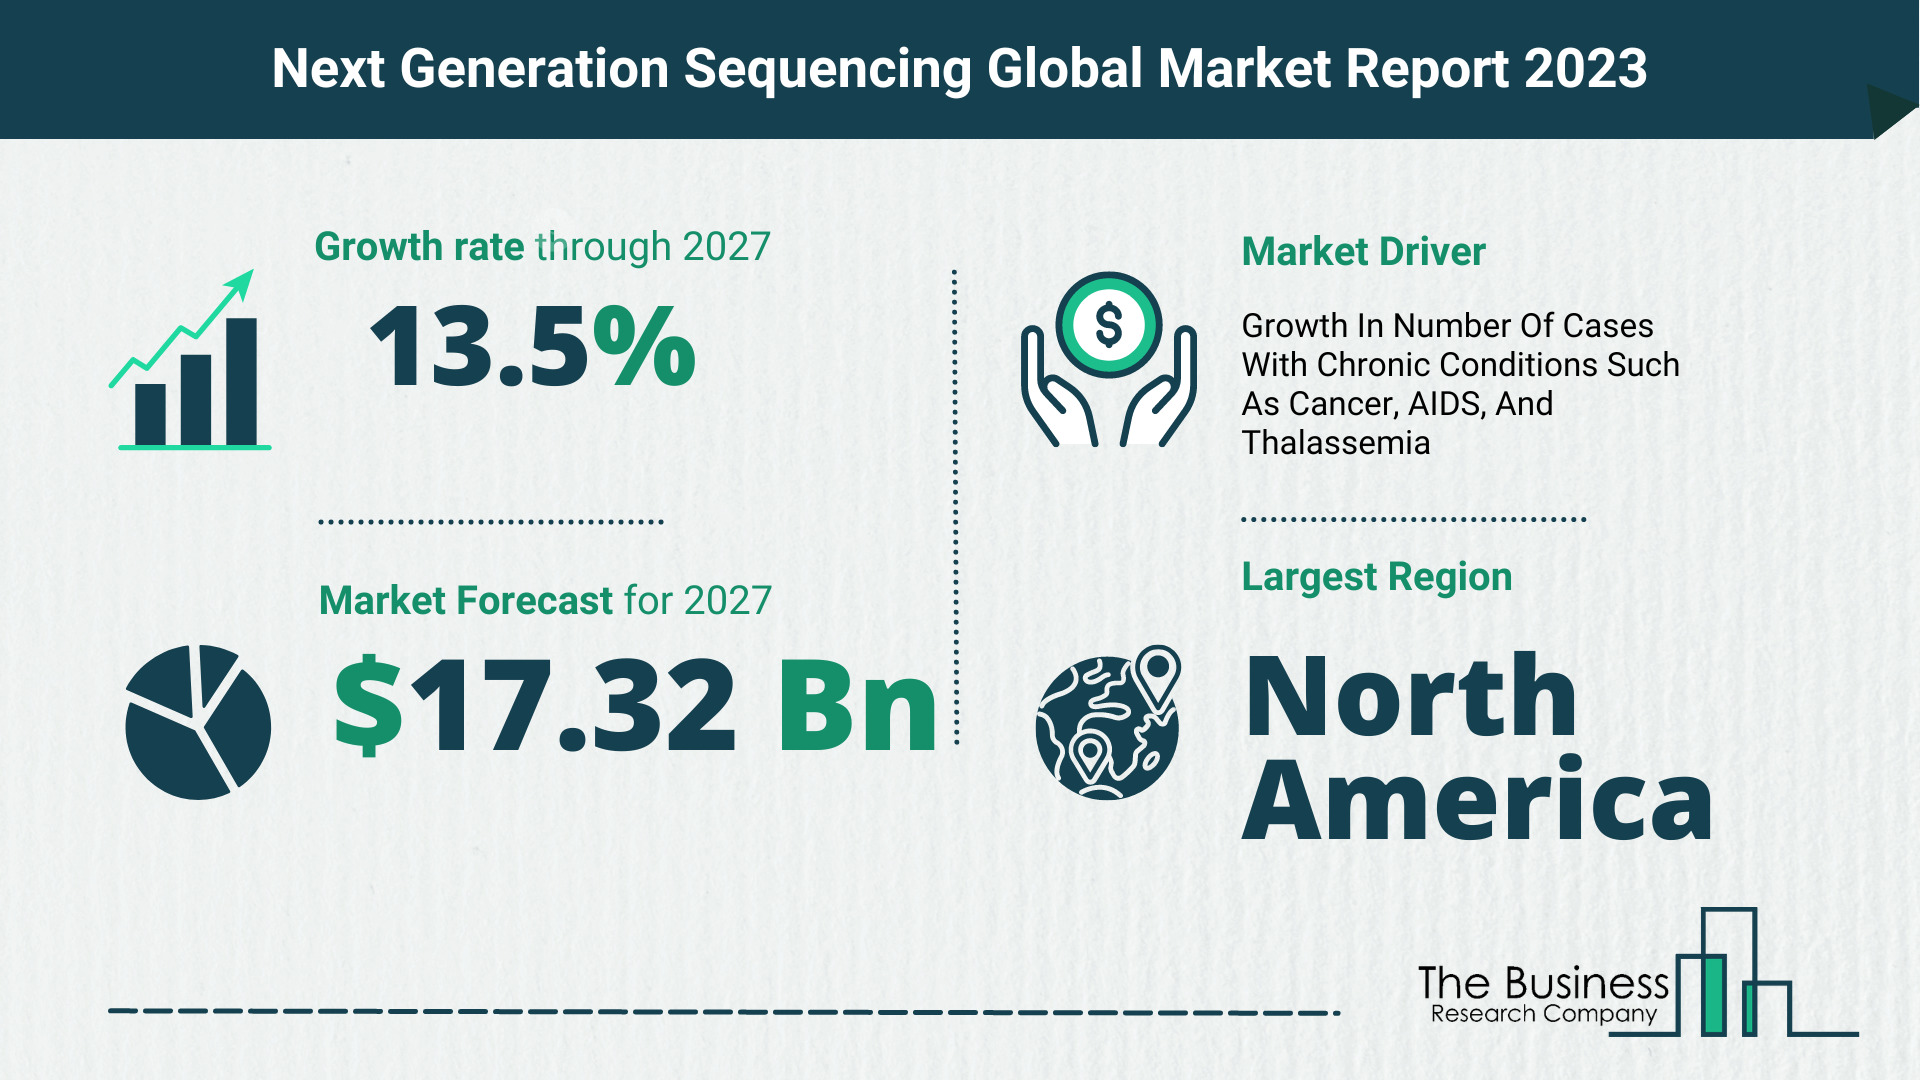 Next Generation Sequencing Market Size, Share, And Growth Rate Analysis 2023